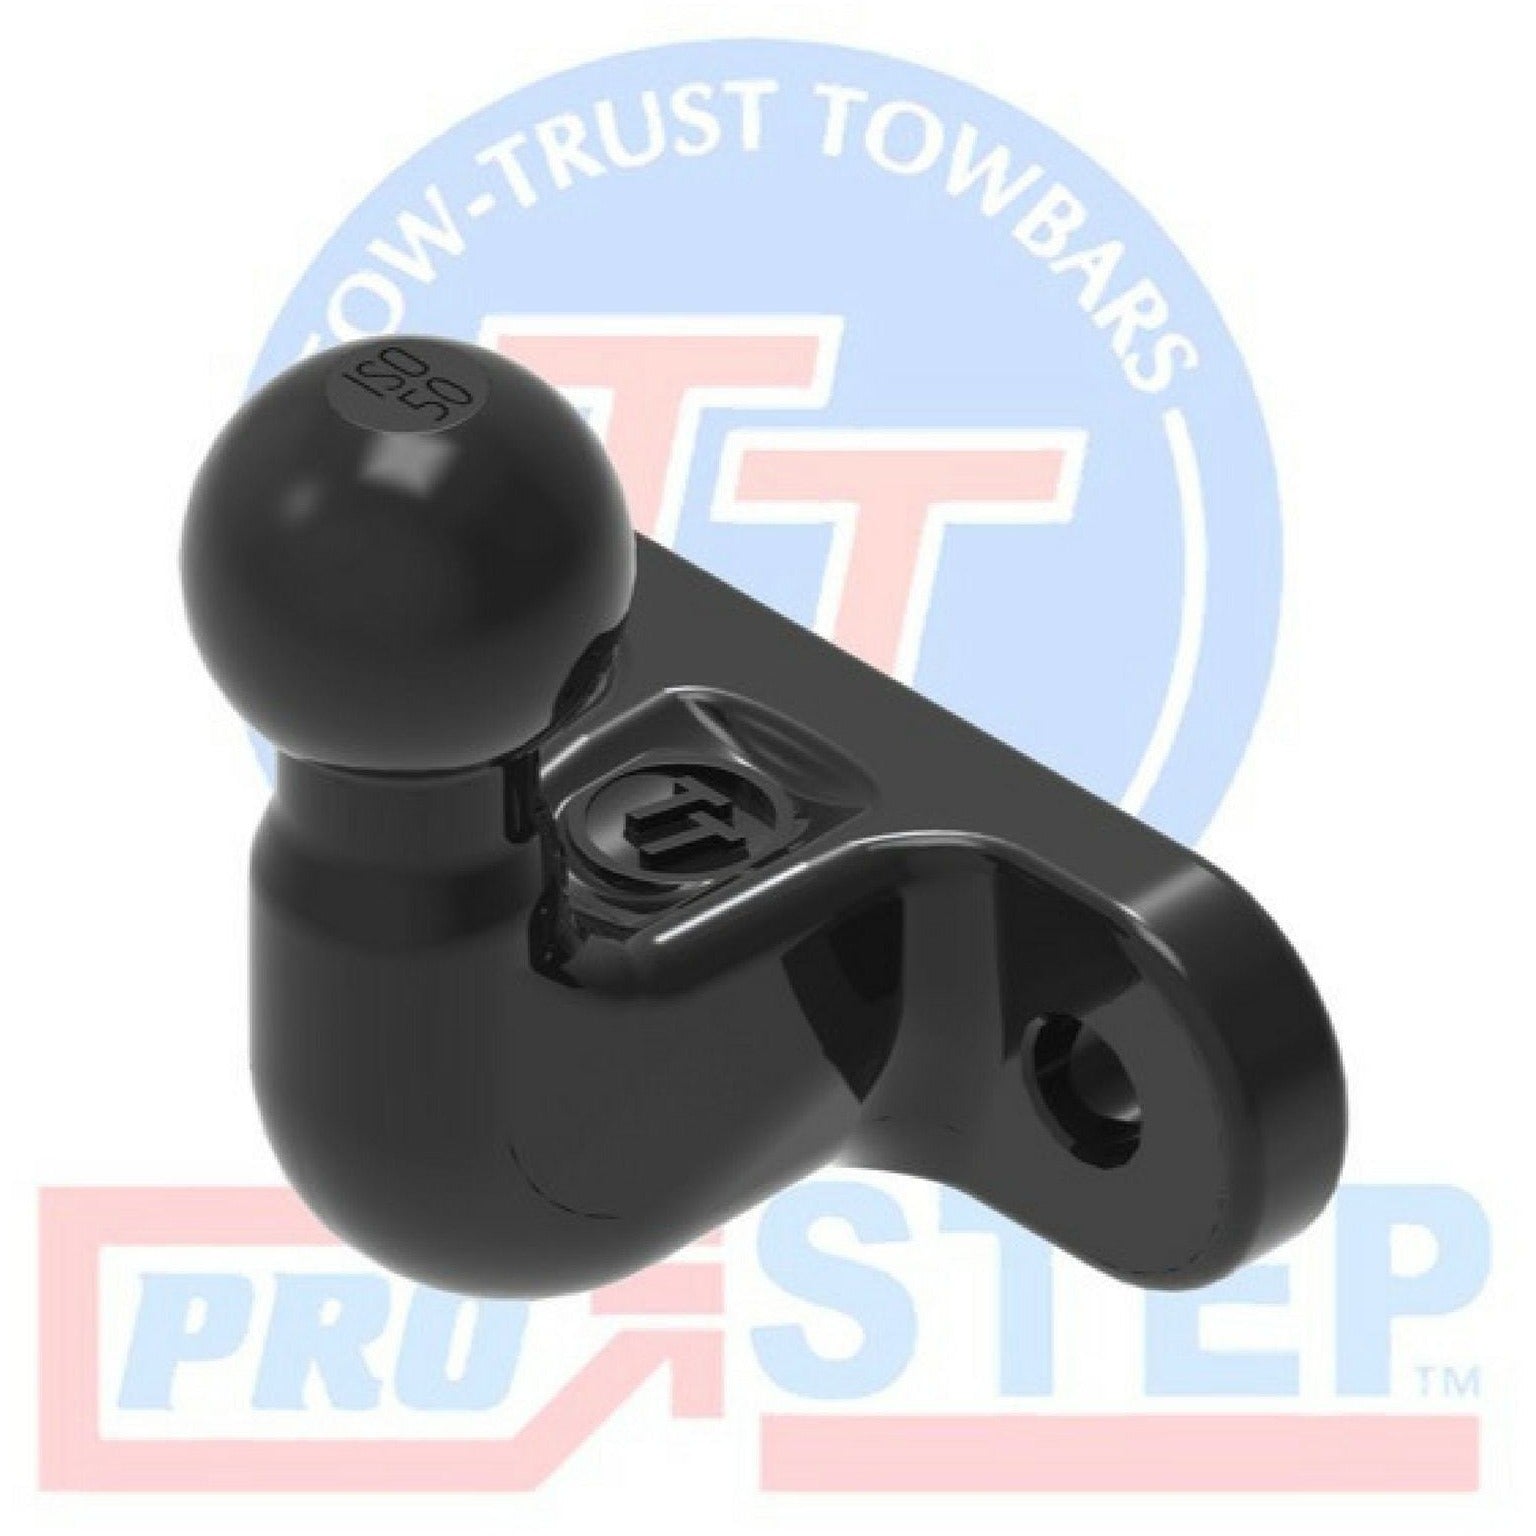 Tow Trust Autotrail Towbar (TAUT4) - Quality Caravan Awnings